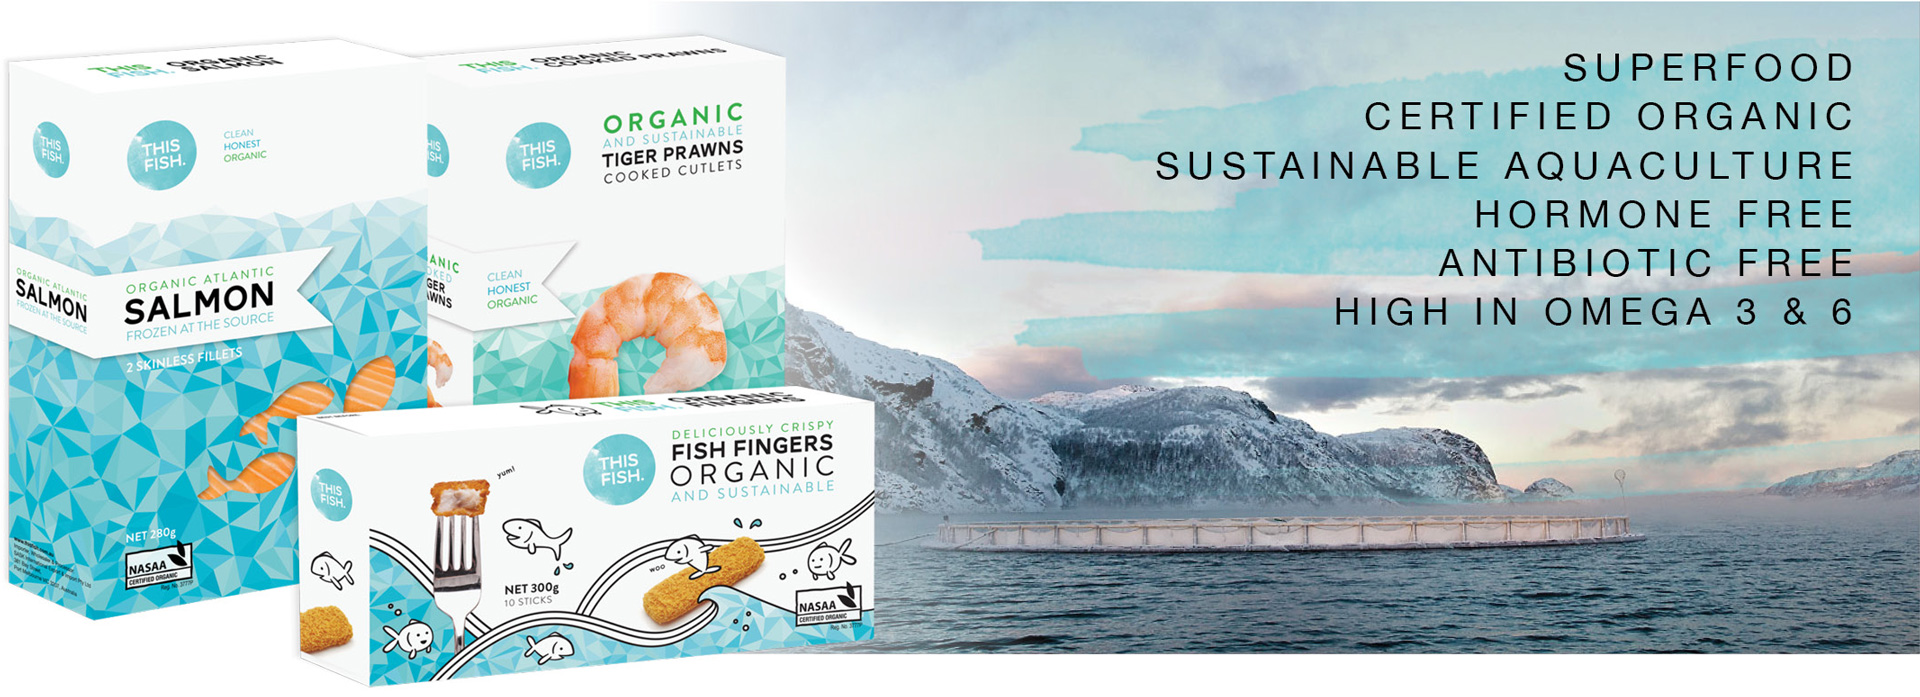 Superfood, Certified Organic, Sustainable Aquaculture, Hormone Free, Antibiotic Free, High In Omega 3 & 6